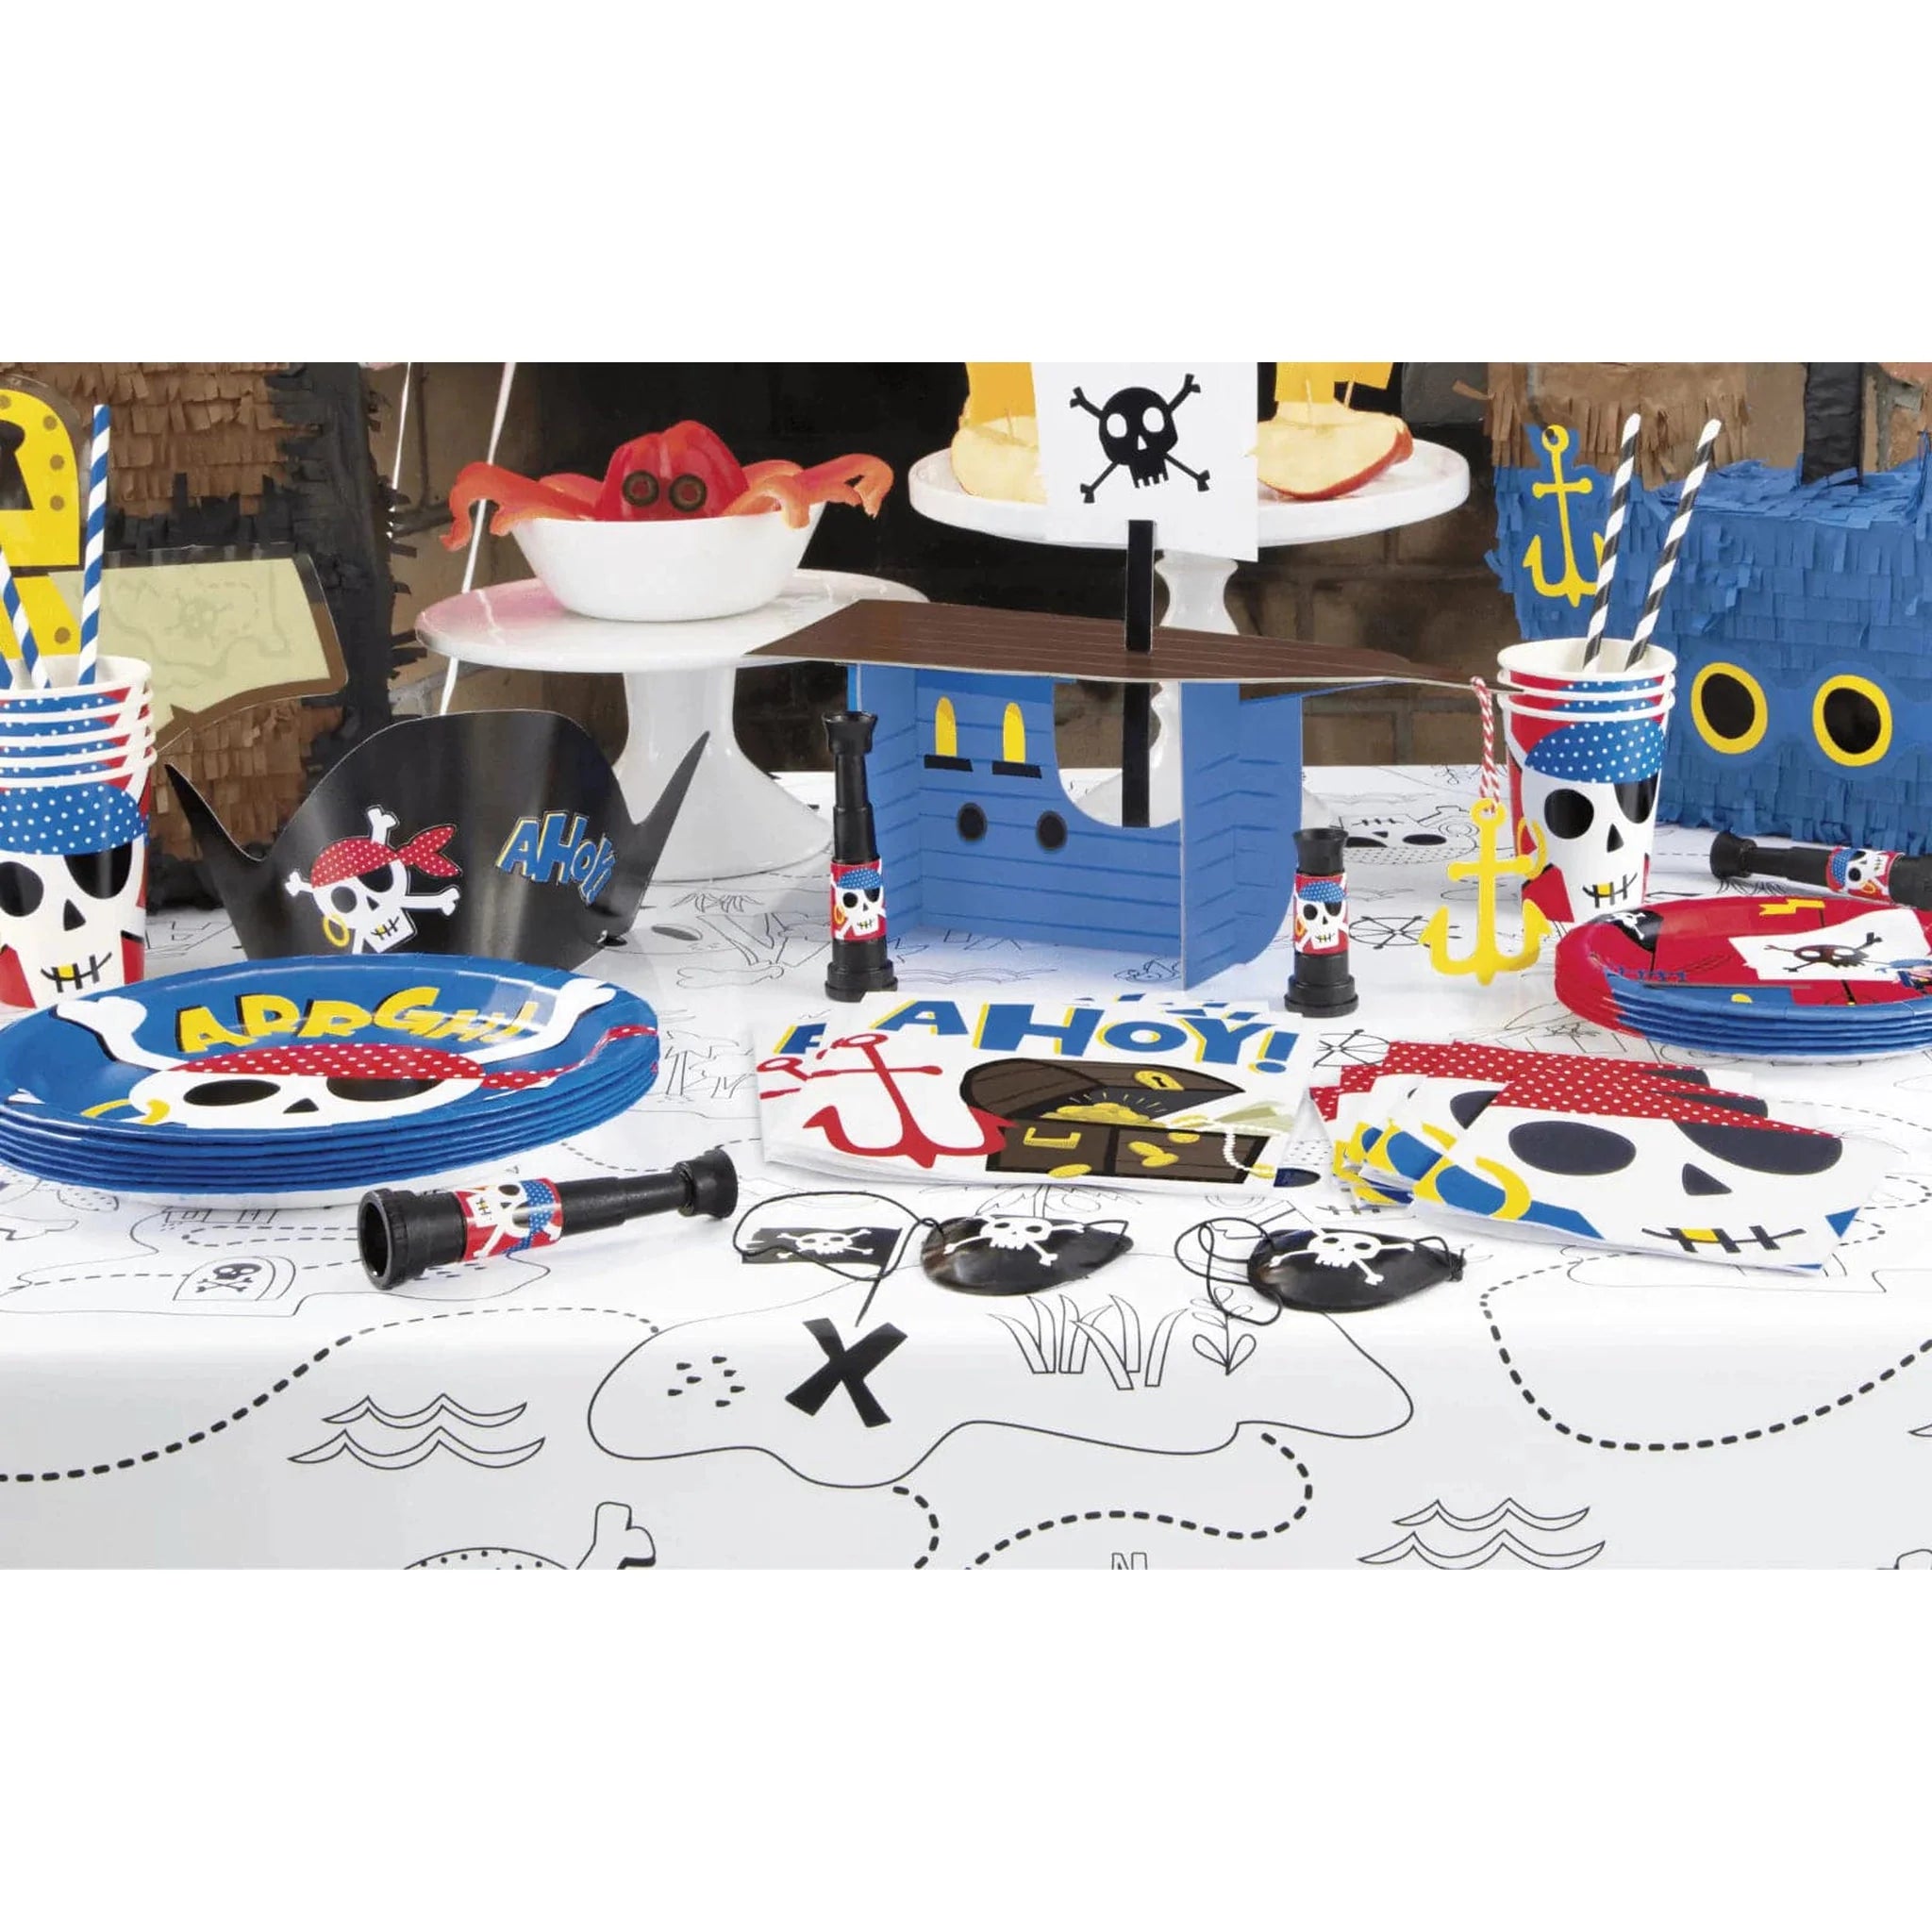 Ahoy Pirate Party Hats 8pk - Kids Party Craft